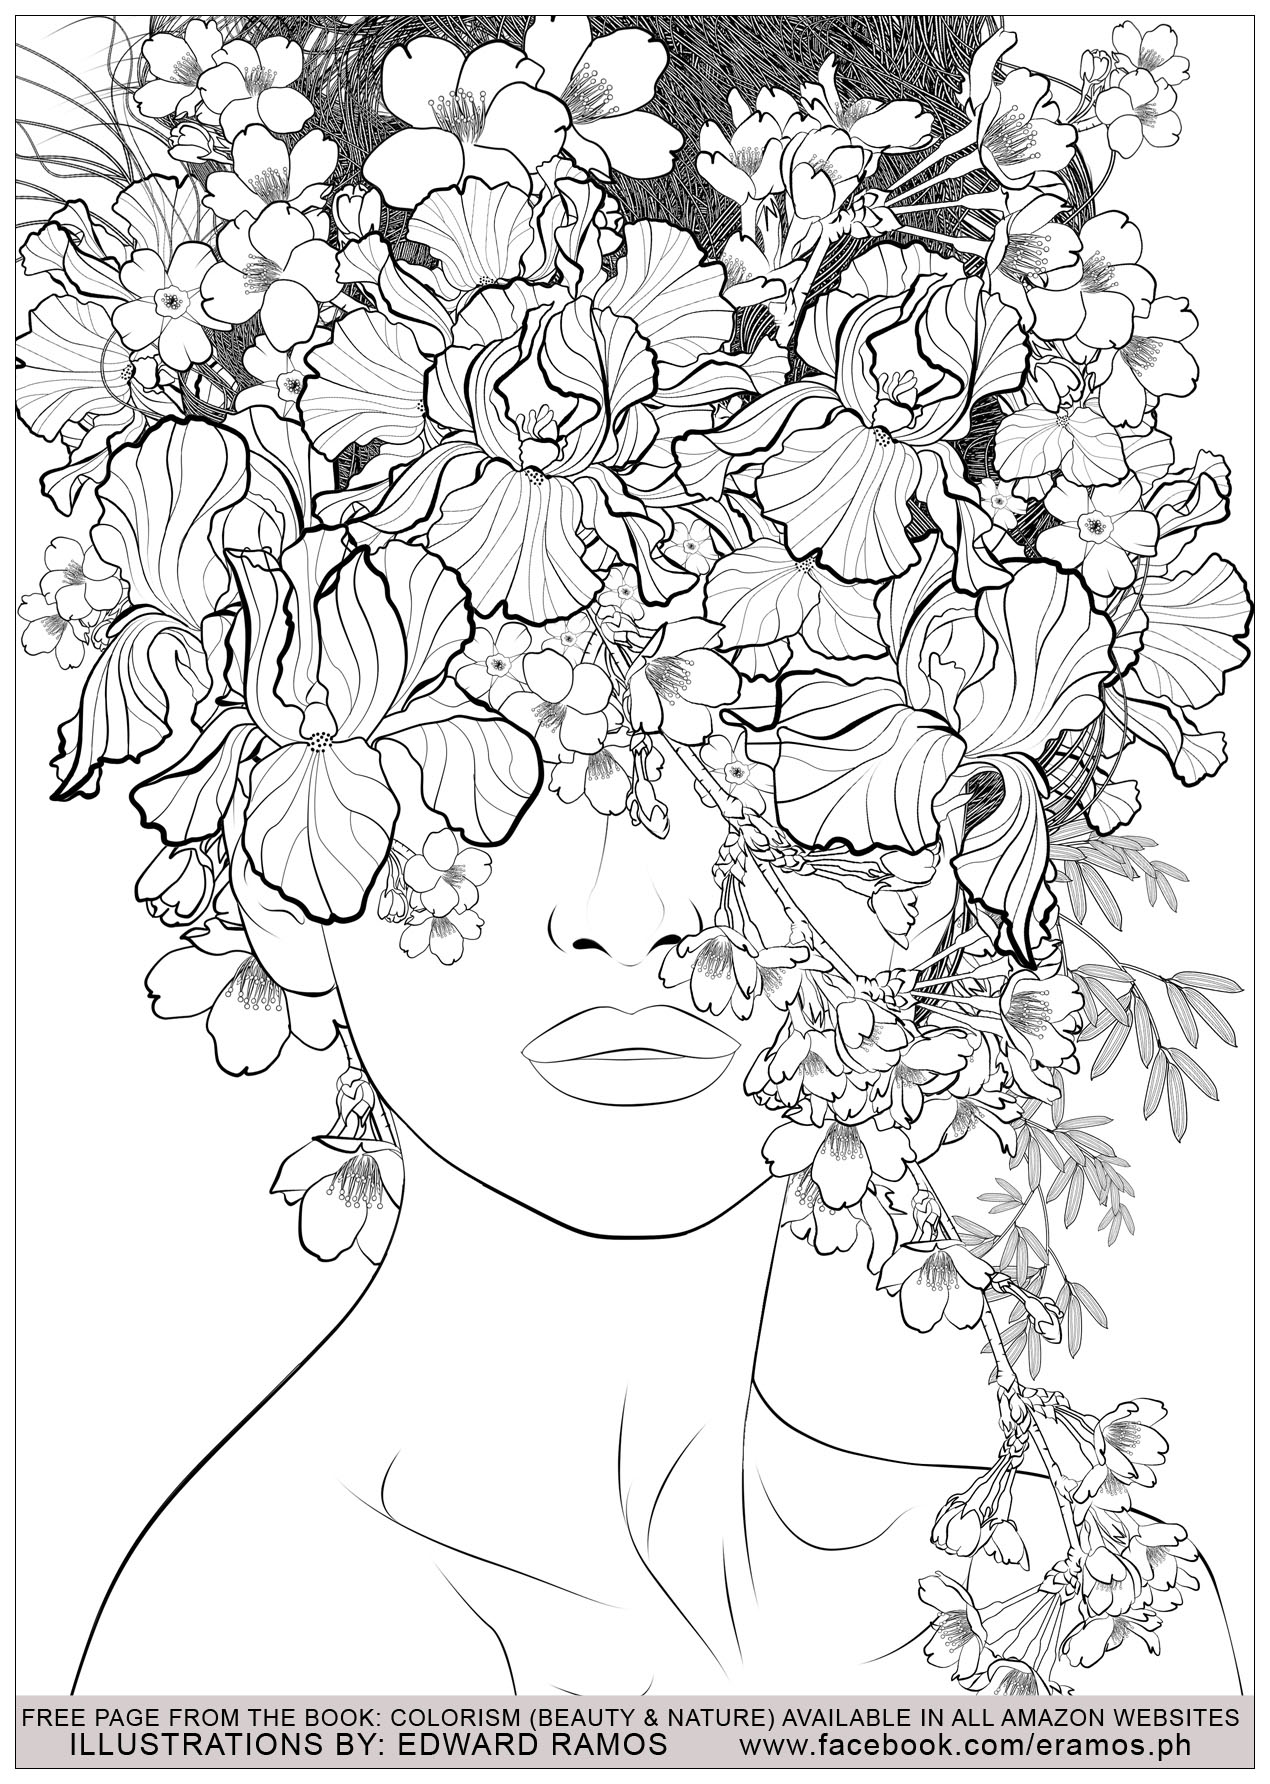 Illustration from the book Colorism - Beauty & Nature by Edward Ramos - 7, Artist : Edward Ramos